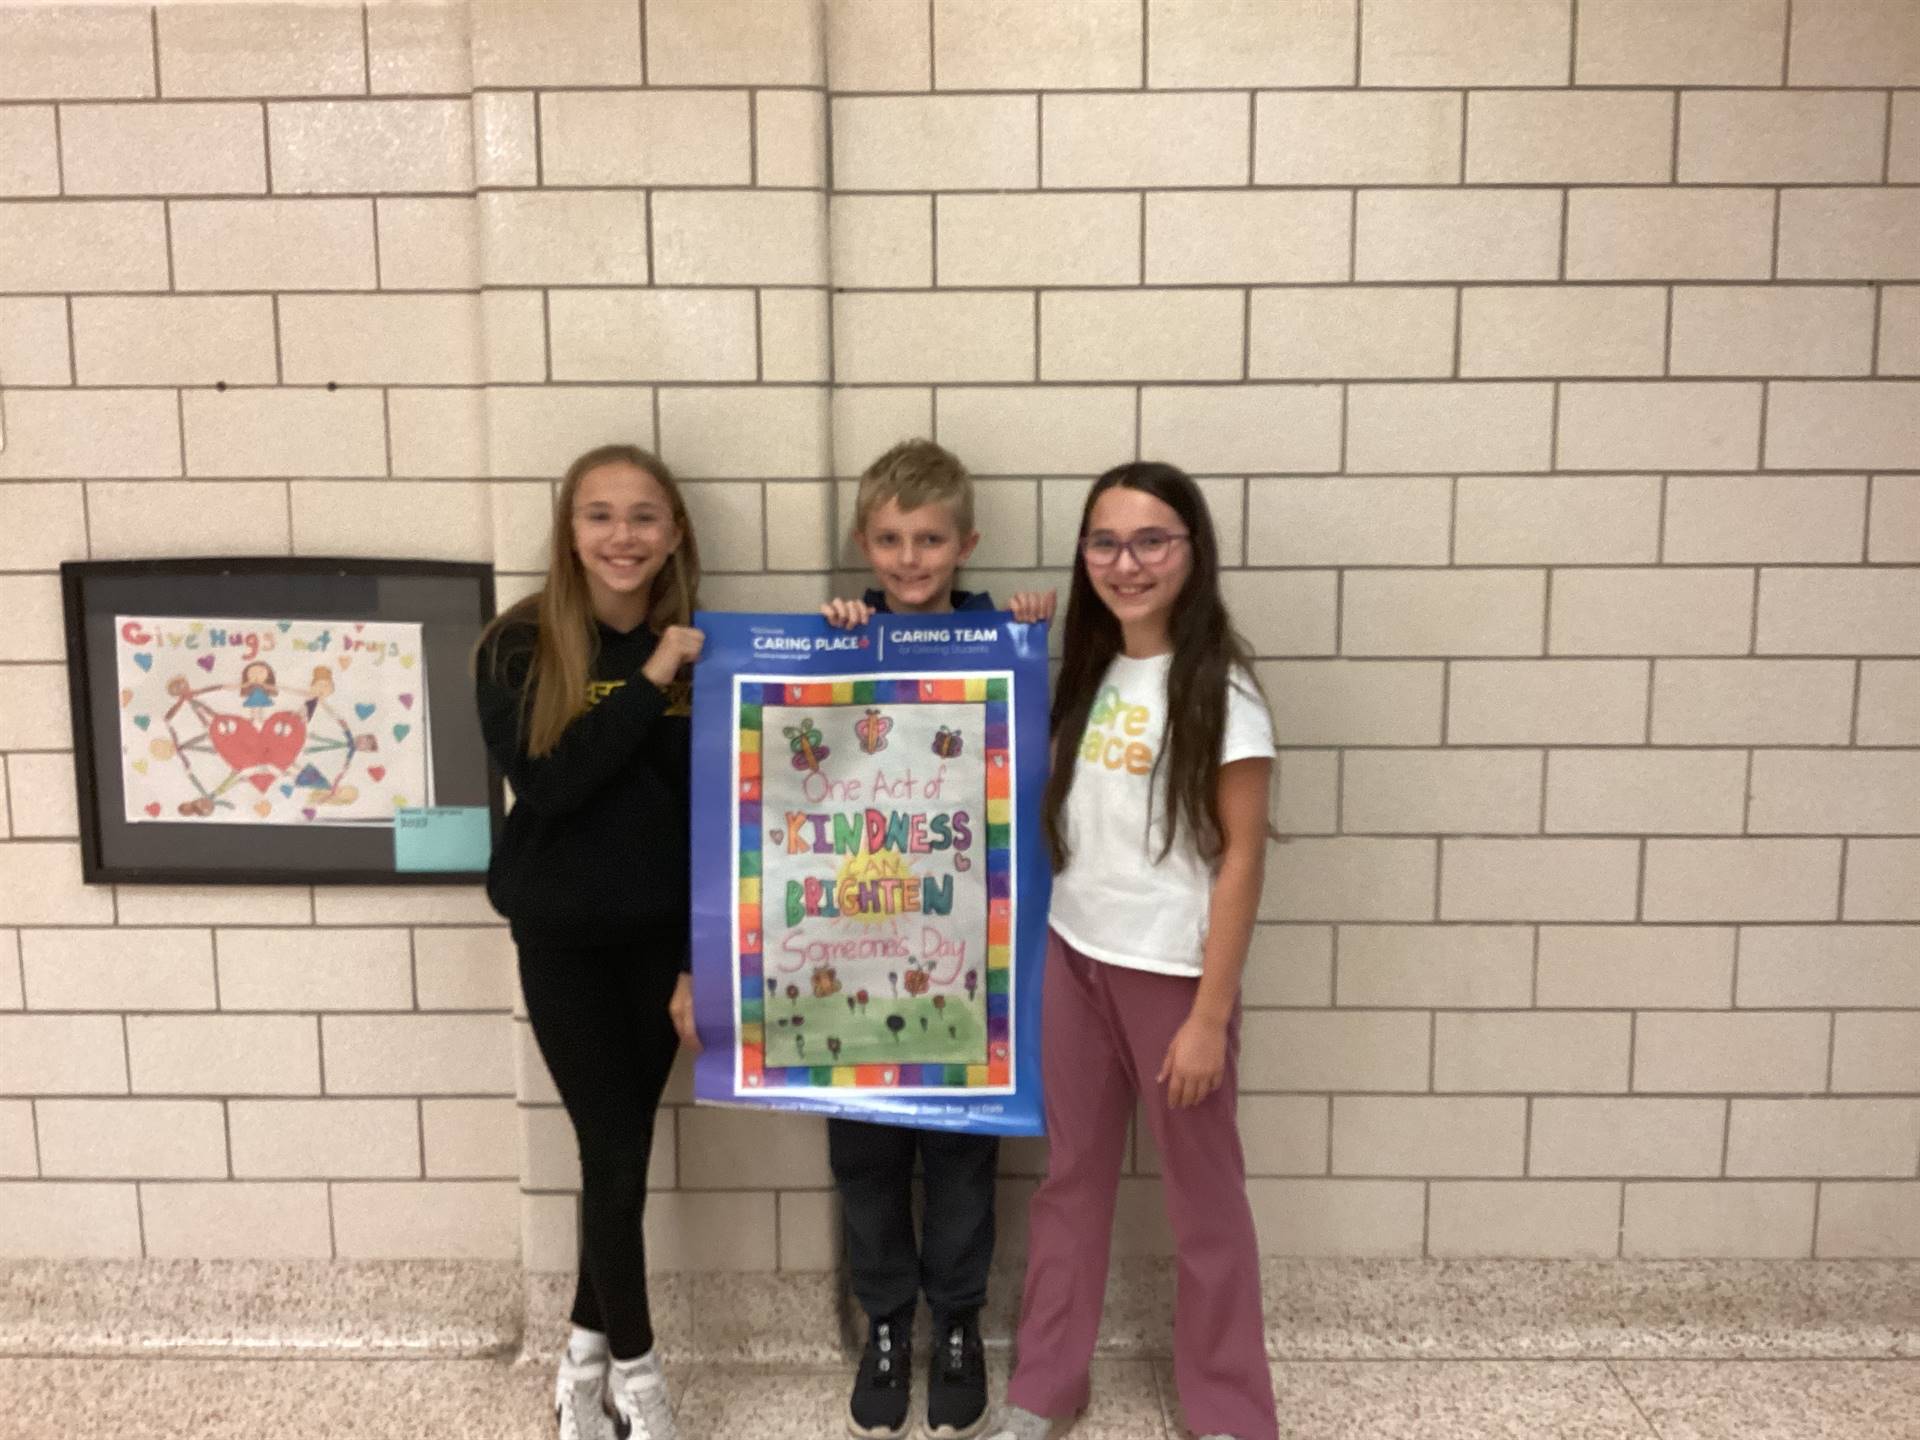 4th grade winners of poster contest